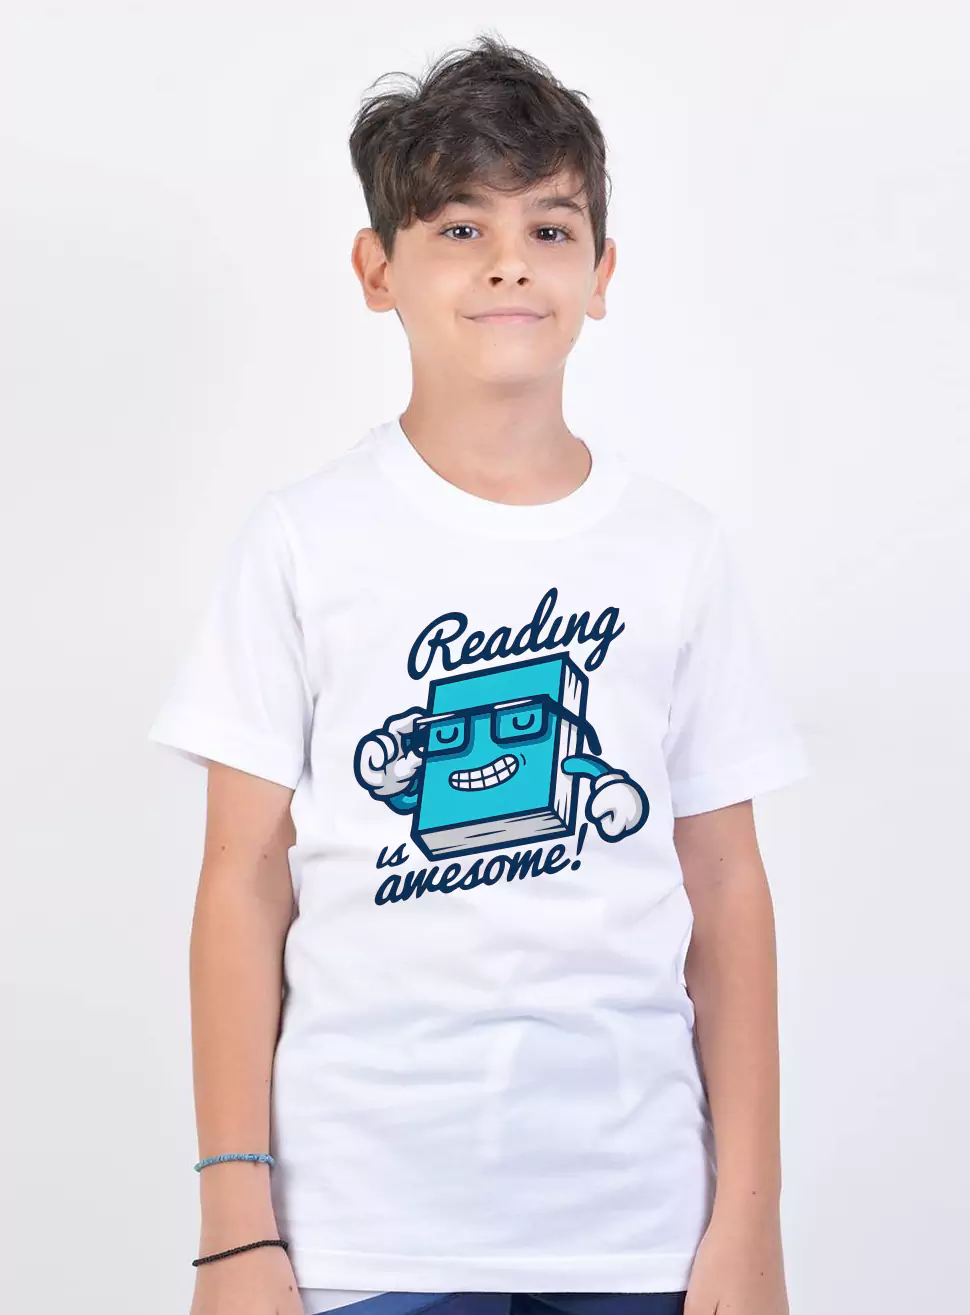 bookworm boy wearing reading is awesome t shirt